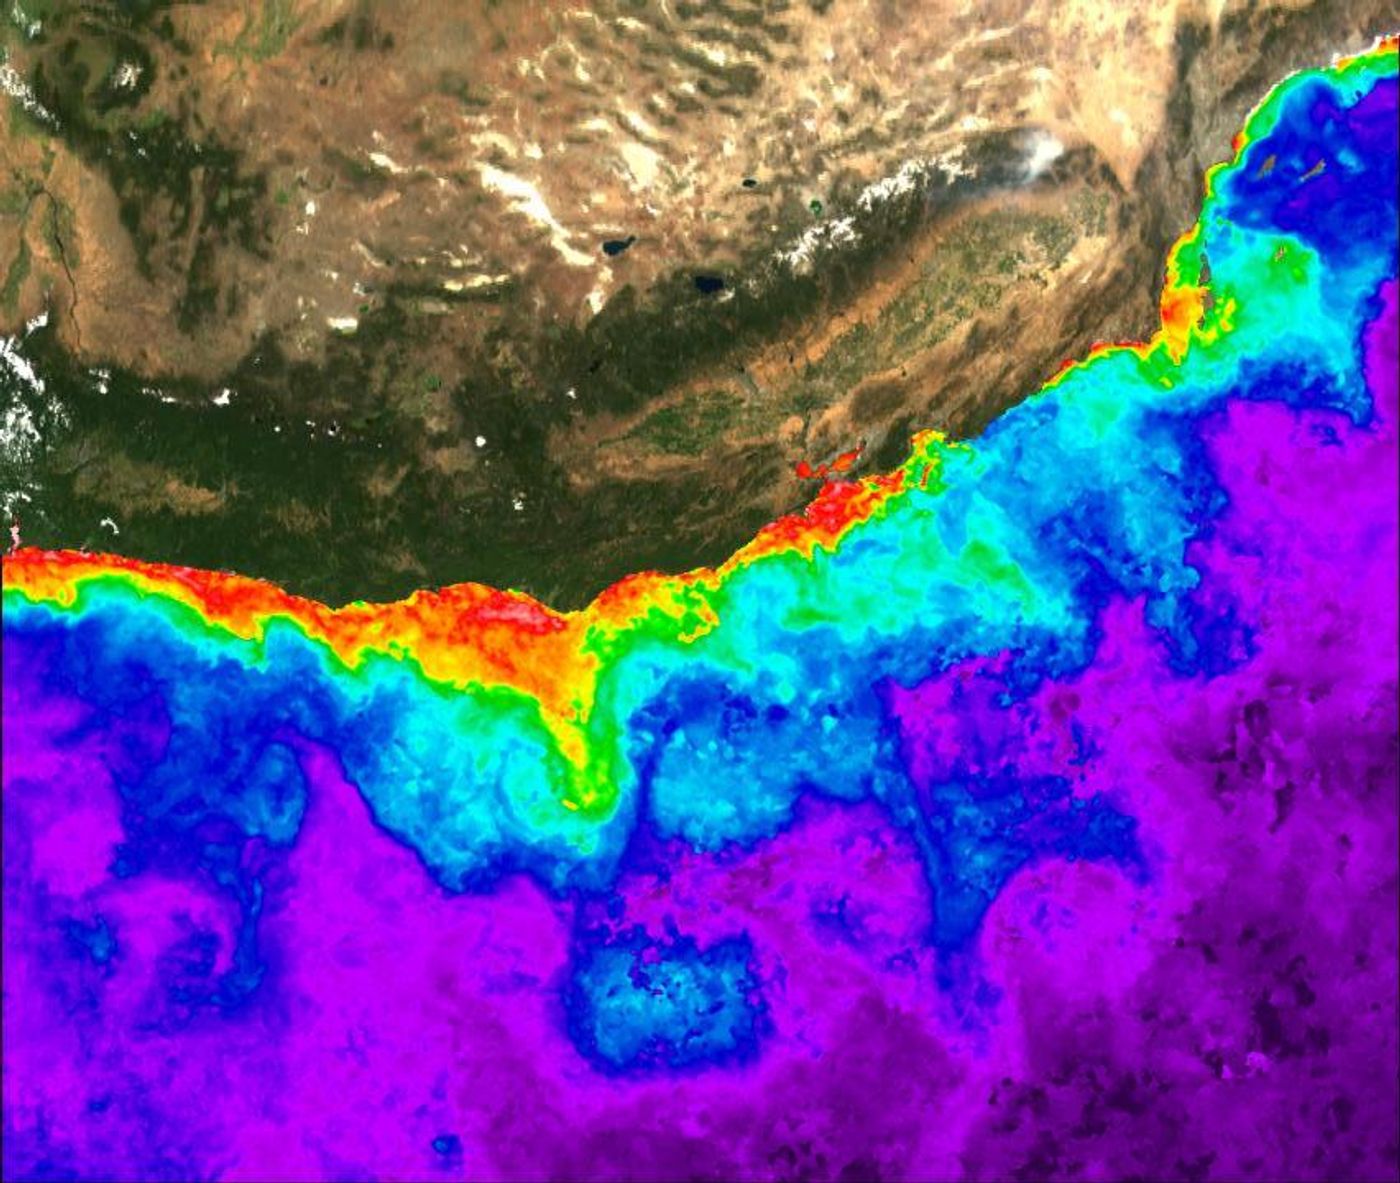 This is the extent of the Pacific Northwest Pseudo-nitzschia bloom in 2015. Gradation of colors purple-blue-green-yellow-red-pink in ocean areas shows increasing chlorophyll concentration towards the coast. Satellite data courtesy of NASA Ocean Biology Processing Group and LAADS-DAAC. / Credit: Mati Kahru, Scripps Institution of Oceanography at UC San Diego.